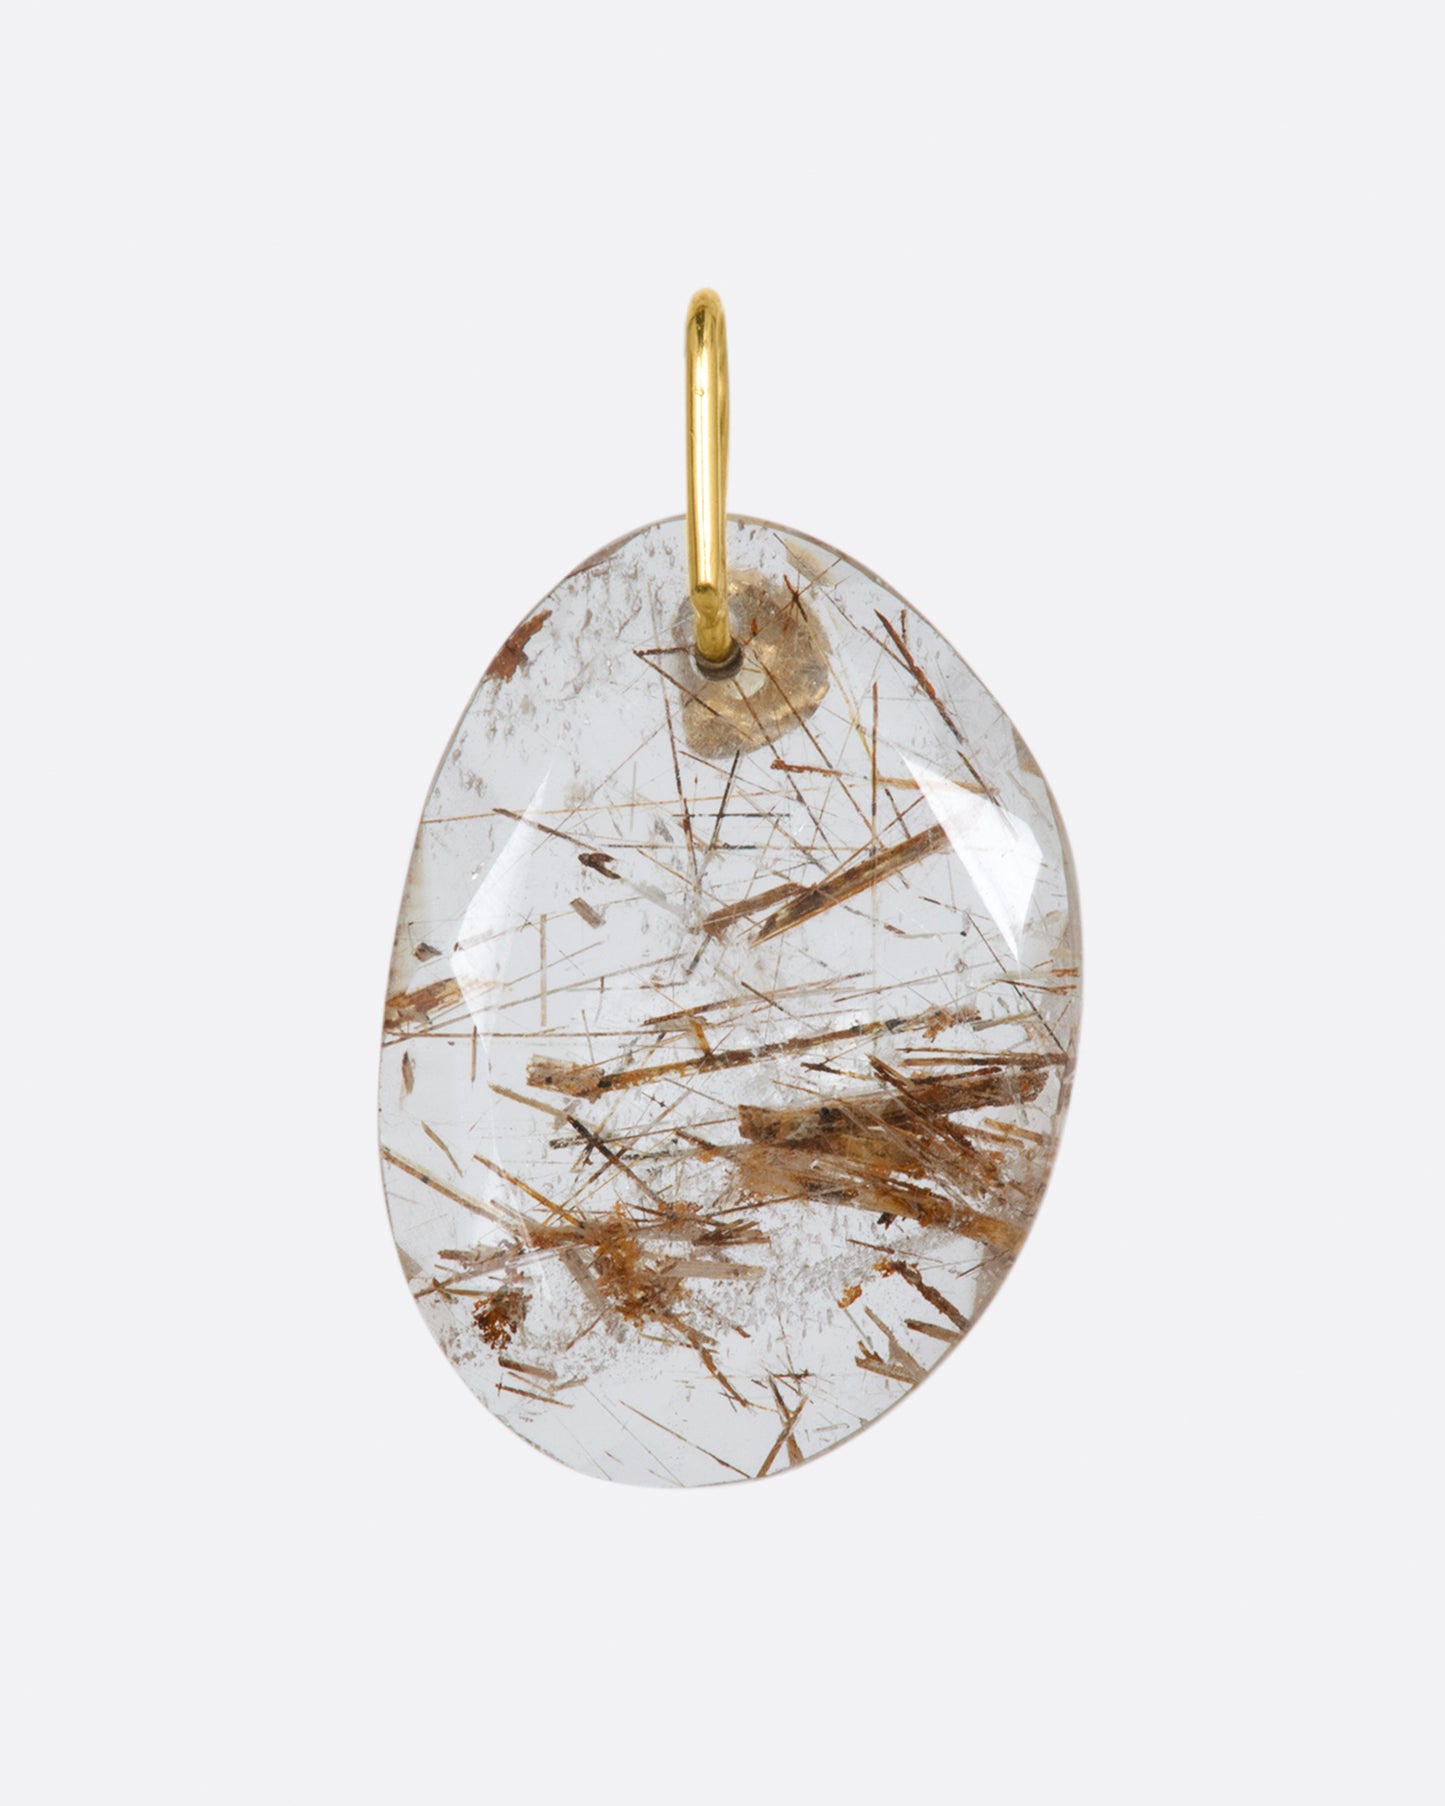 A yellow gold charm featuring a slice of rutilated quartz, with a yellow sapphire at its center. Shown from the back.